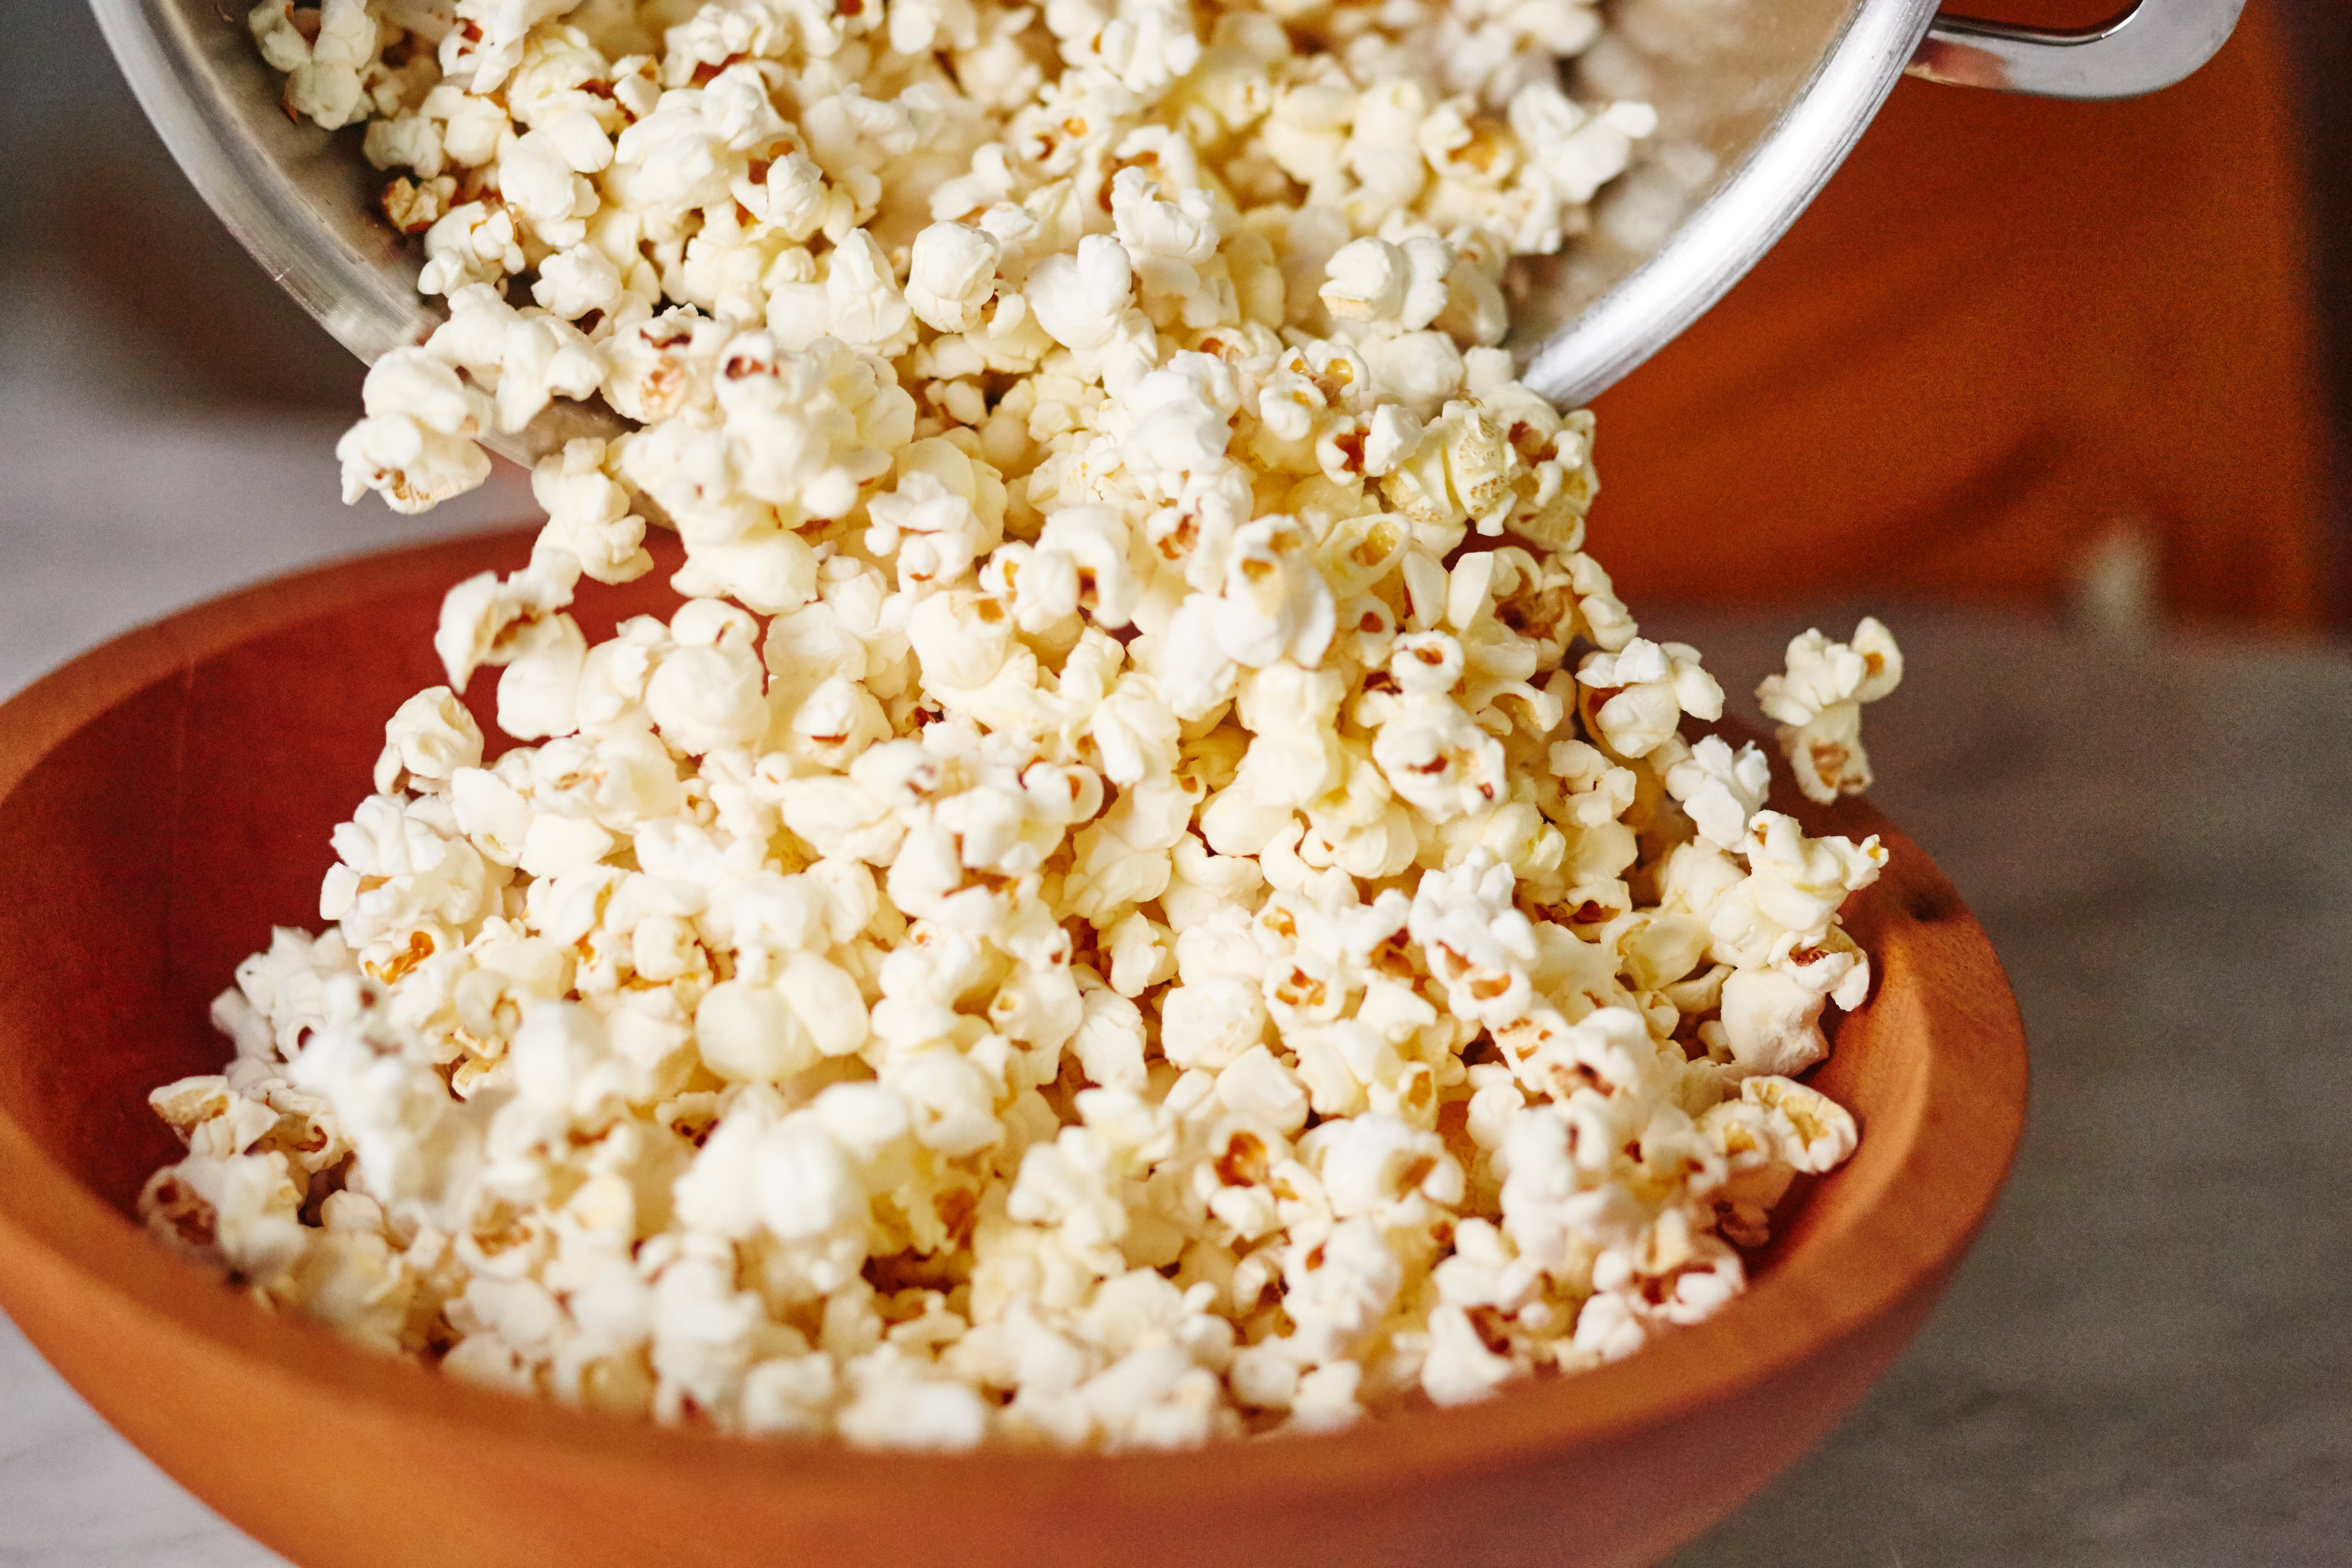 How To Make the Most Buttery, Movie-Style Popcorn